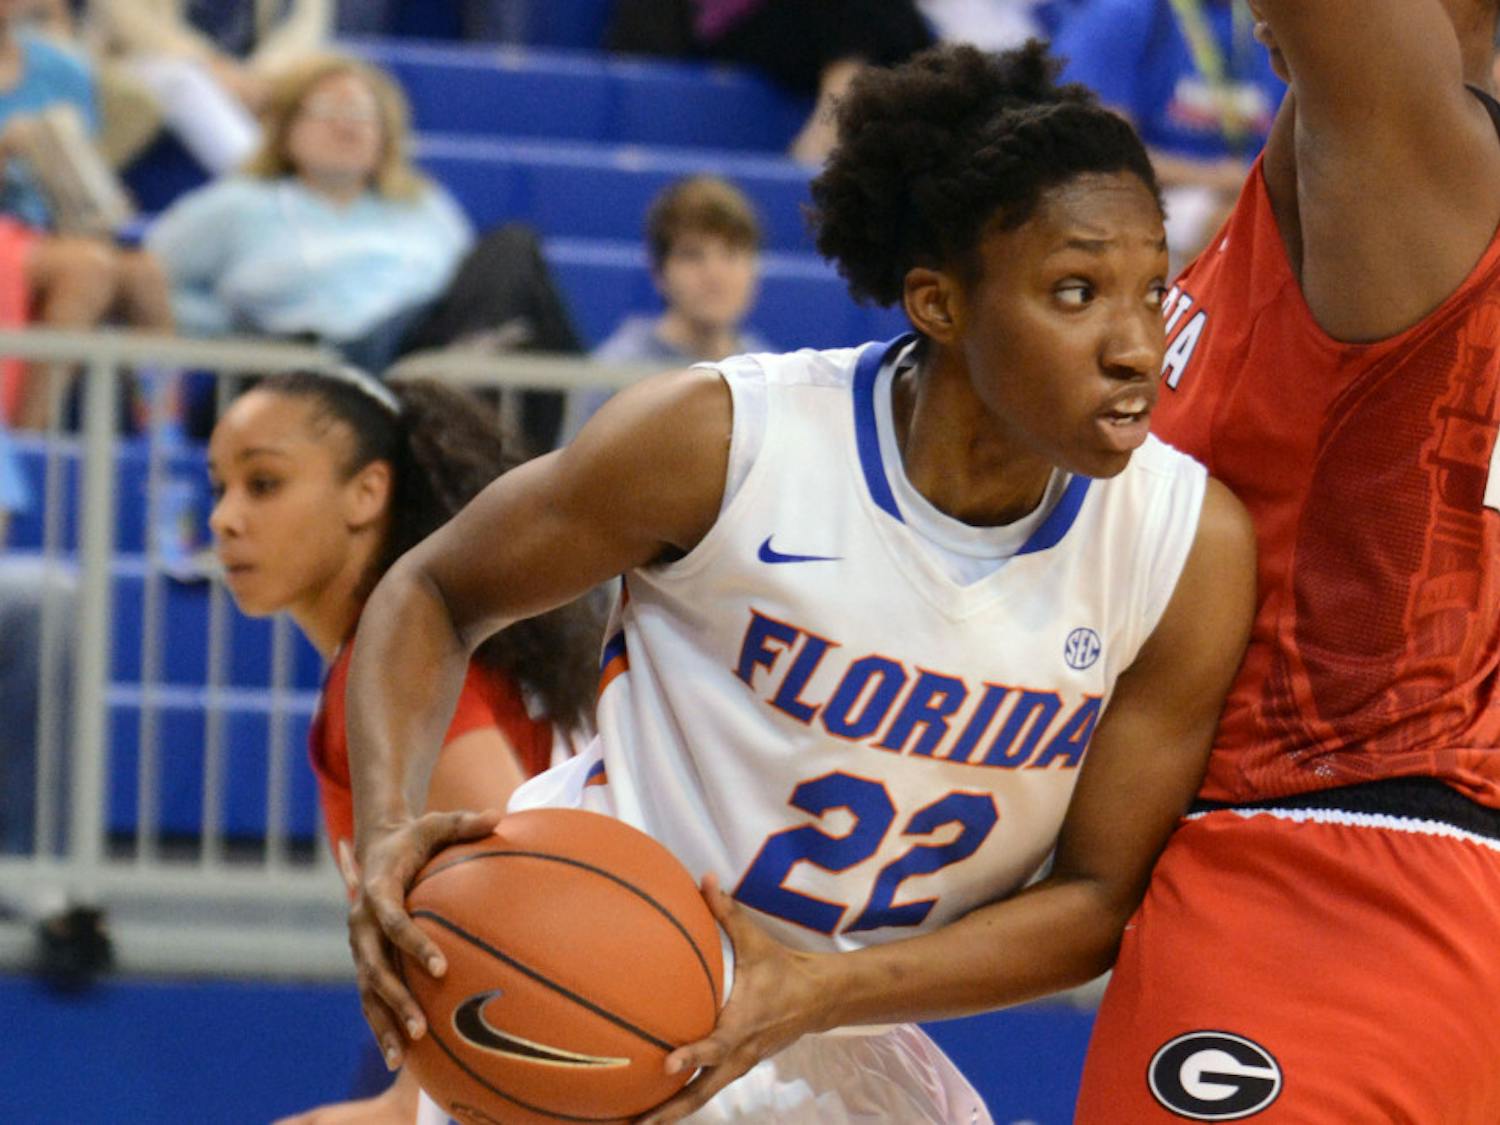 Kayla Lewis drives into the paint during Florida's 52-45 loss to Georgia on Sunday in the O'Connell Center.